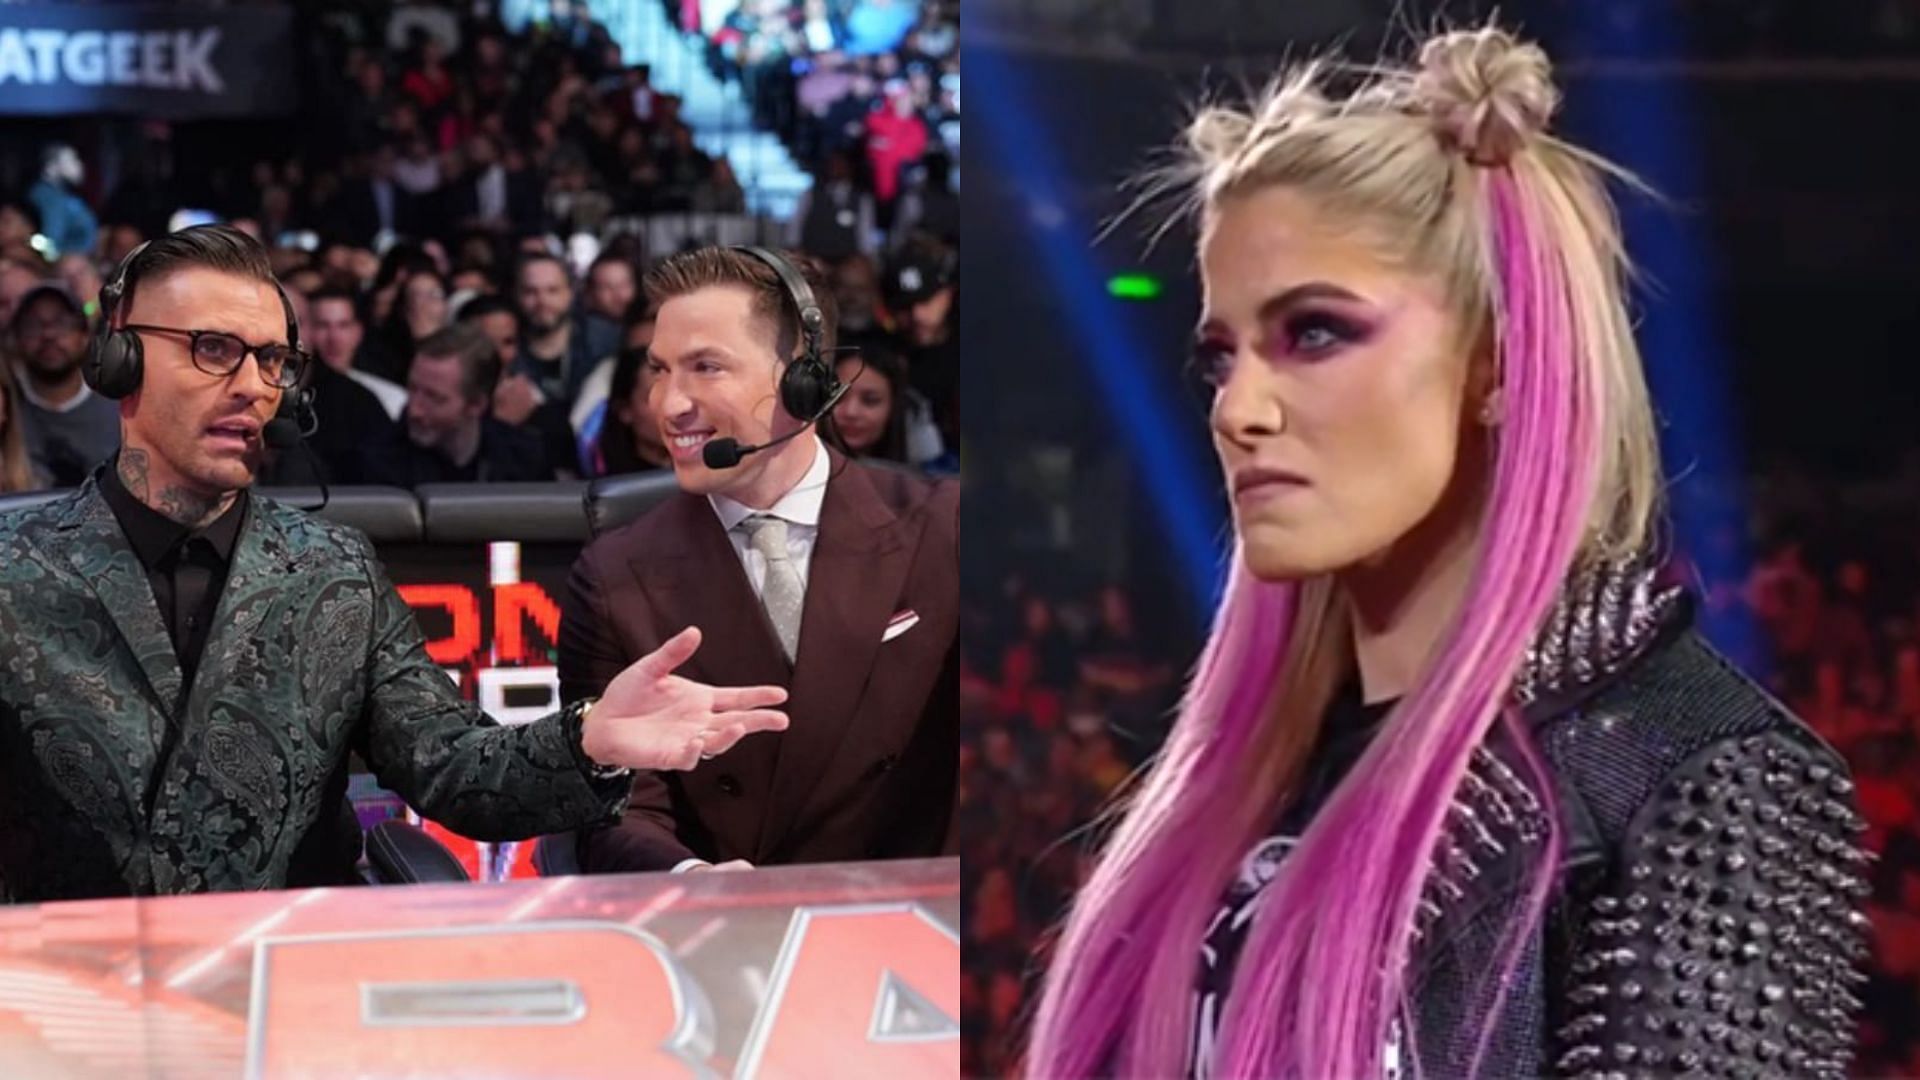 Alexa Bliss was involved in a huge segment on RAW